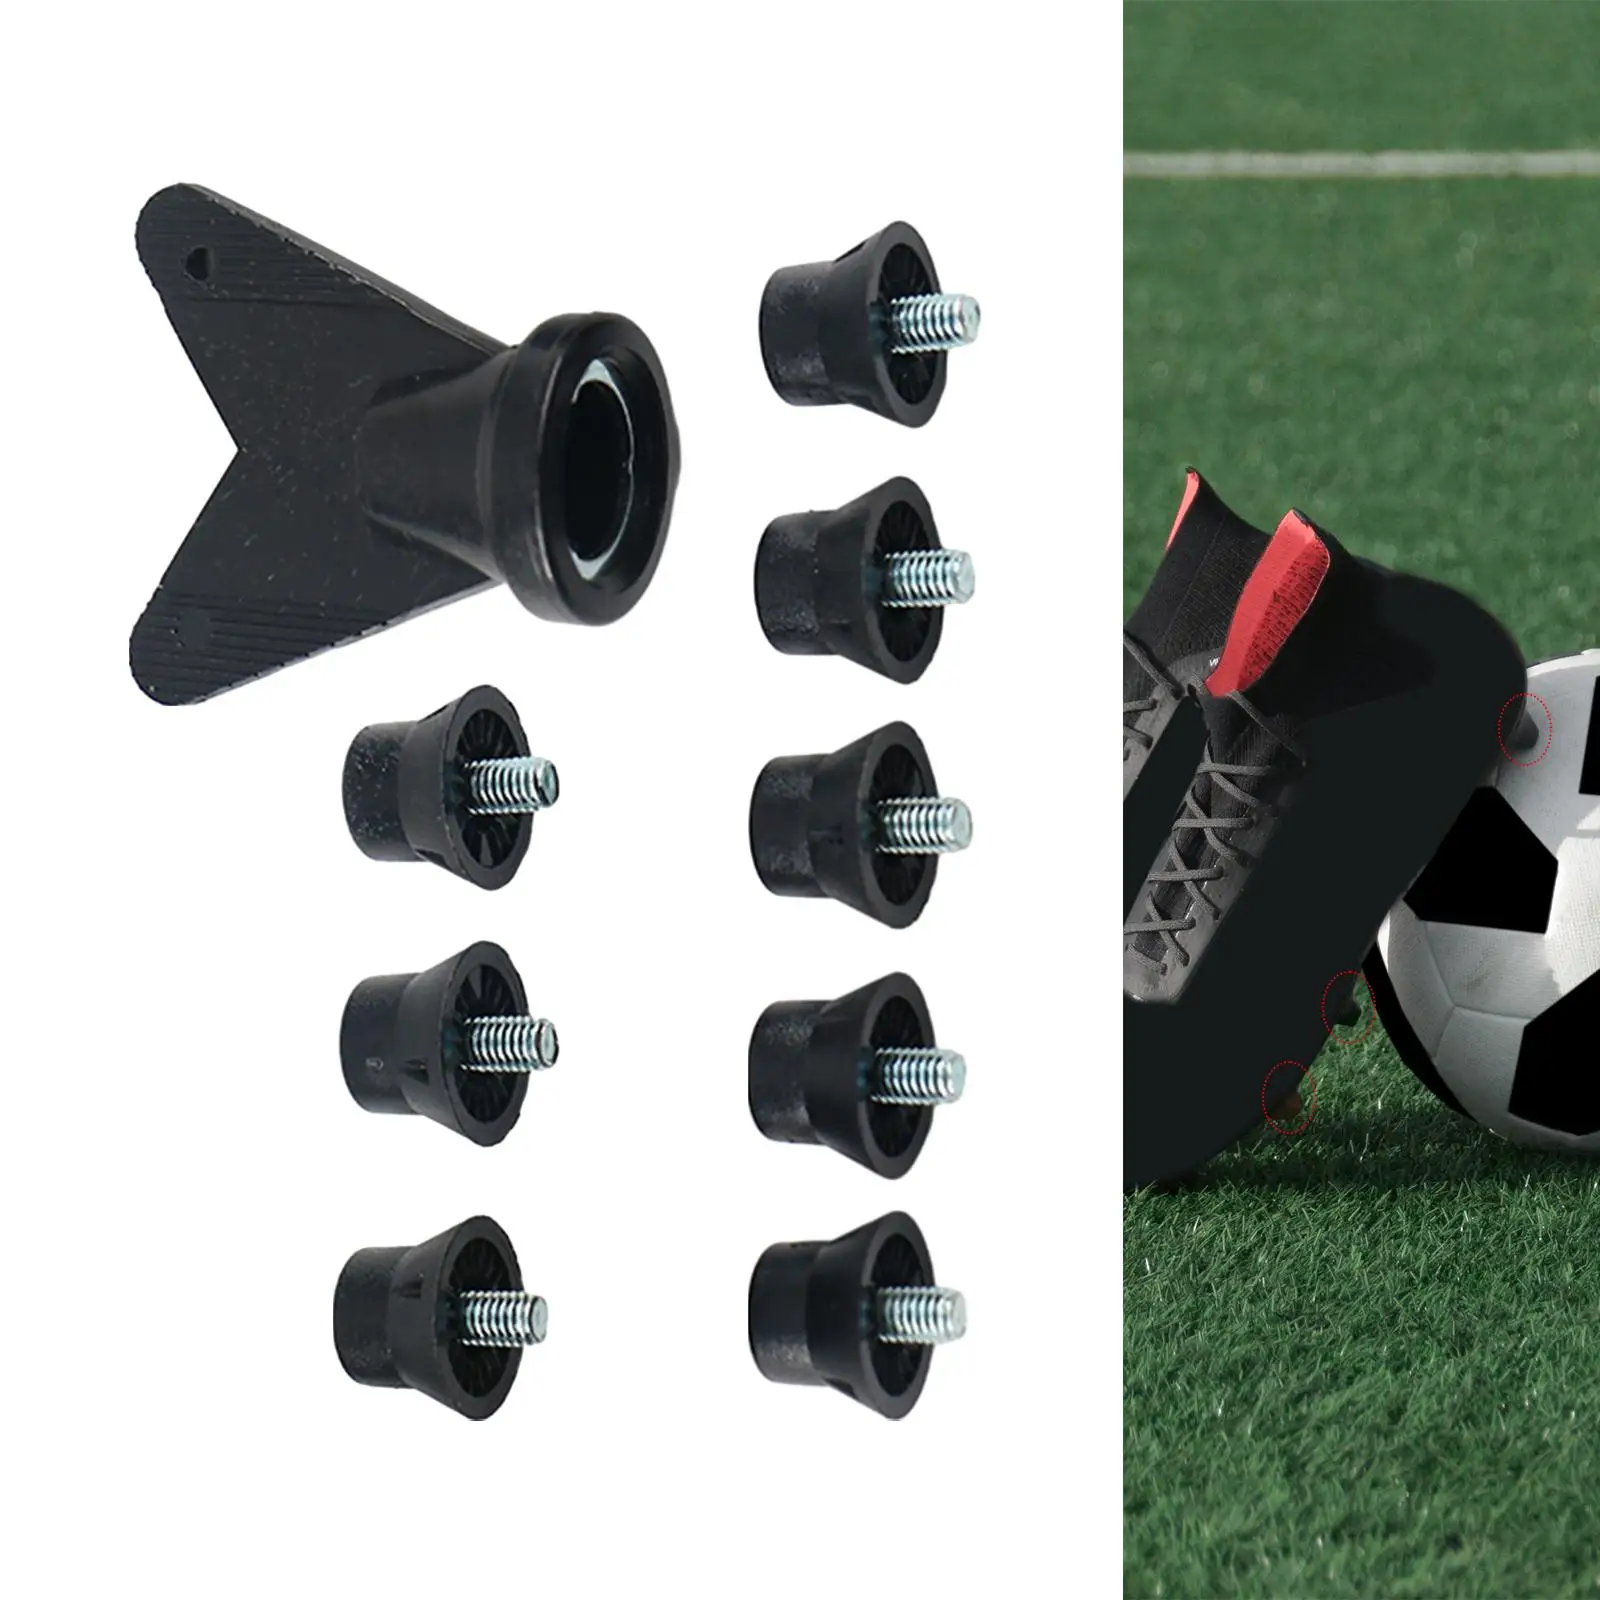 12x Football Boot Studs Replacement Spikes Stable Non Slip Turf Soccer Shoe Spikes Rugby Studs for Athletic Sneakers Training